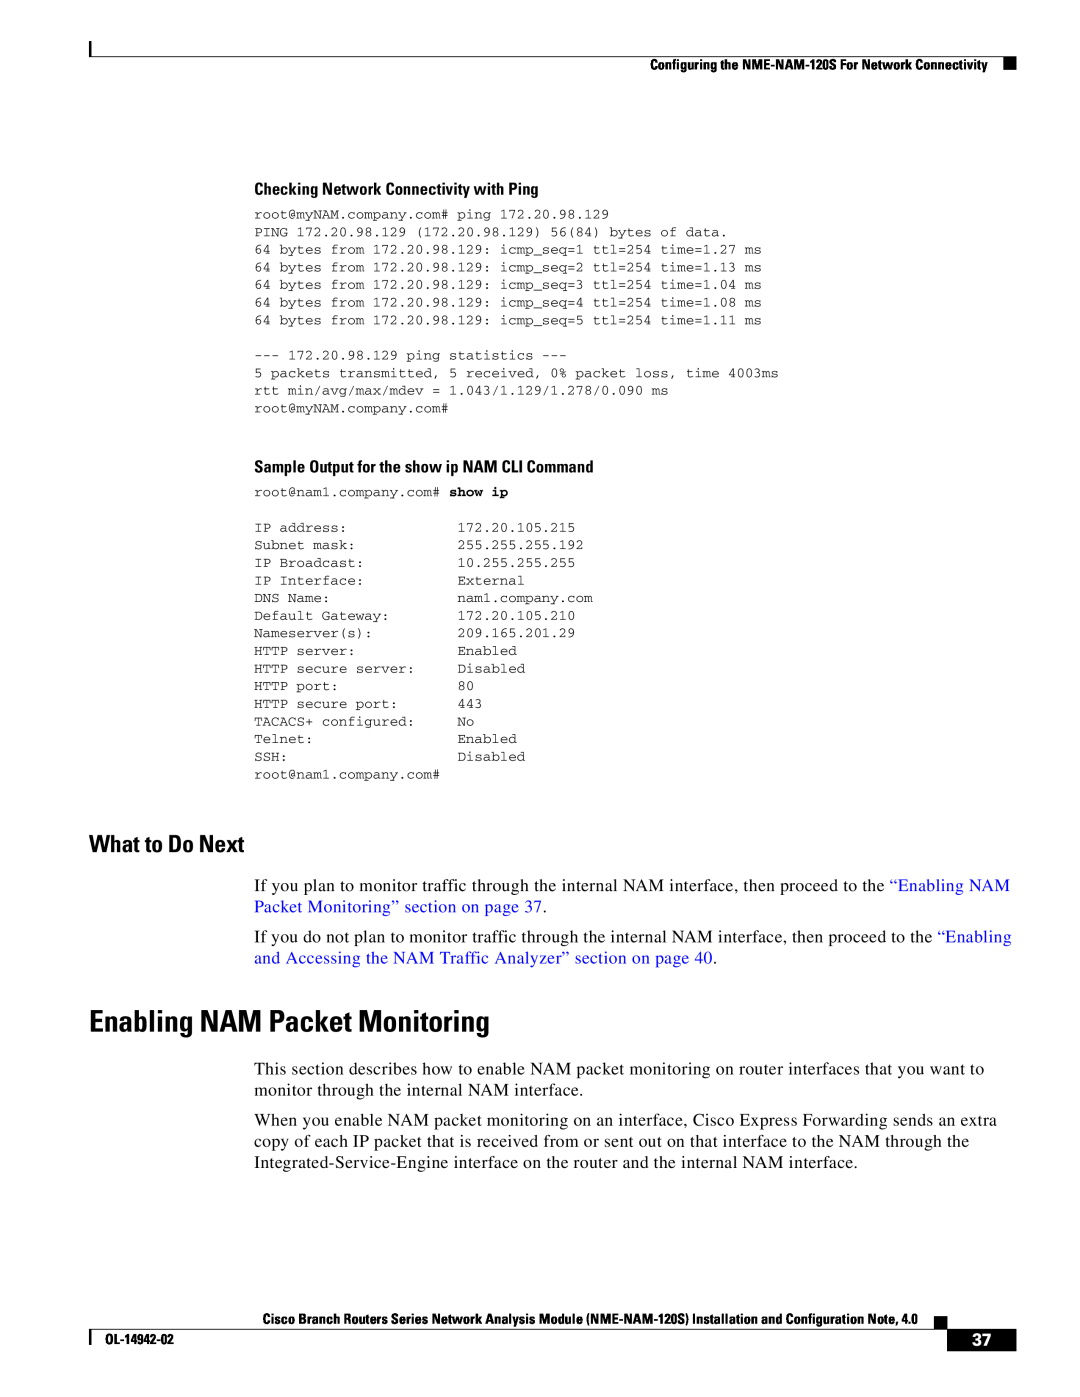 Cisco Systems SMNMADPTR manual Enabling NAM Packet Monitoring, What to Do Next, Checking Network Connectivity with Ping 